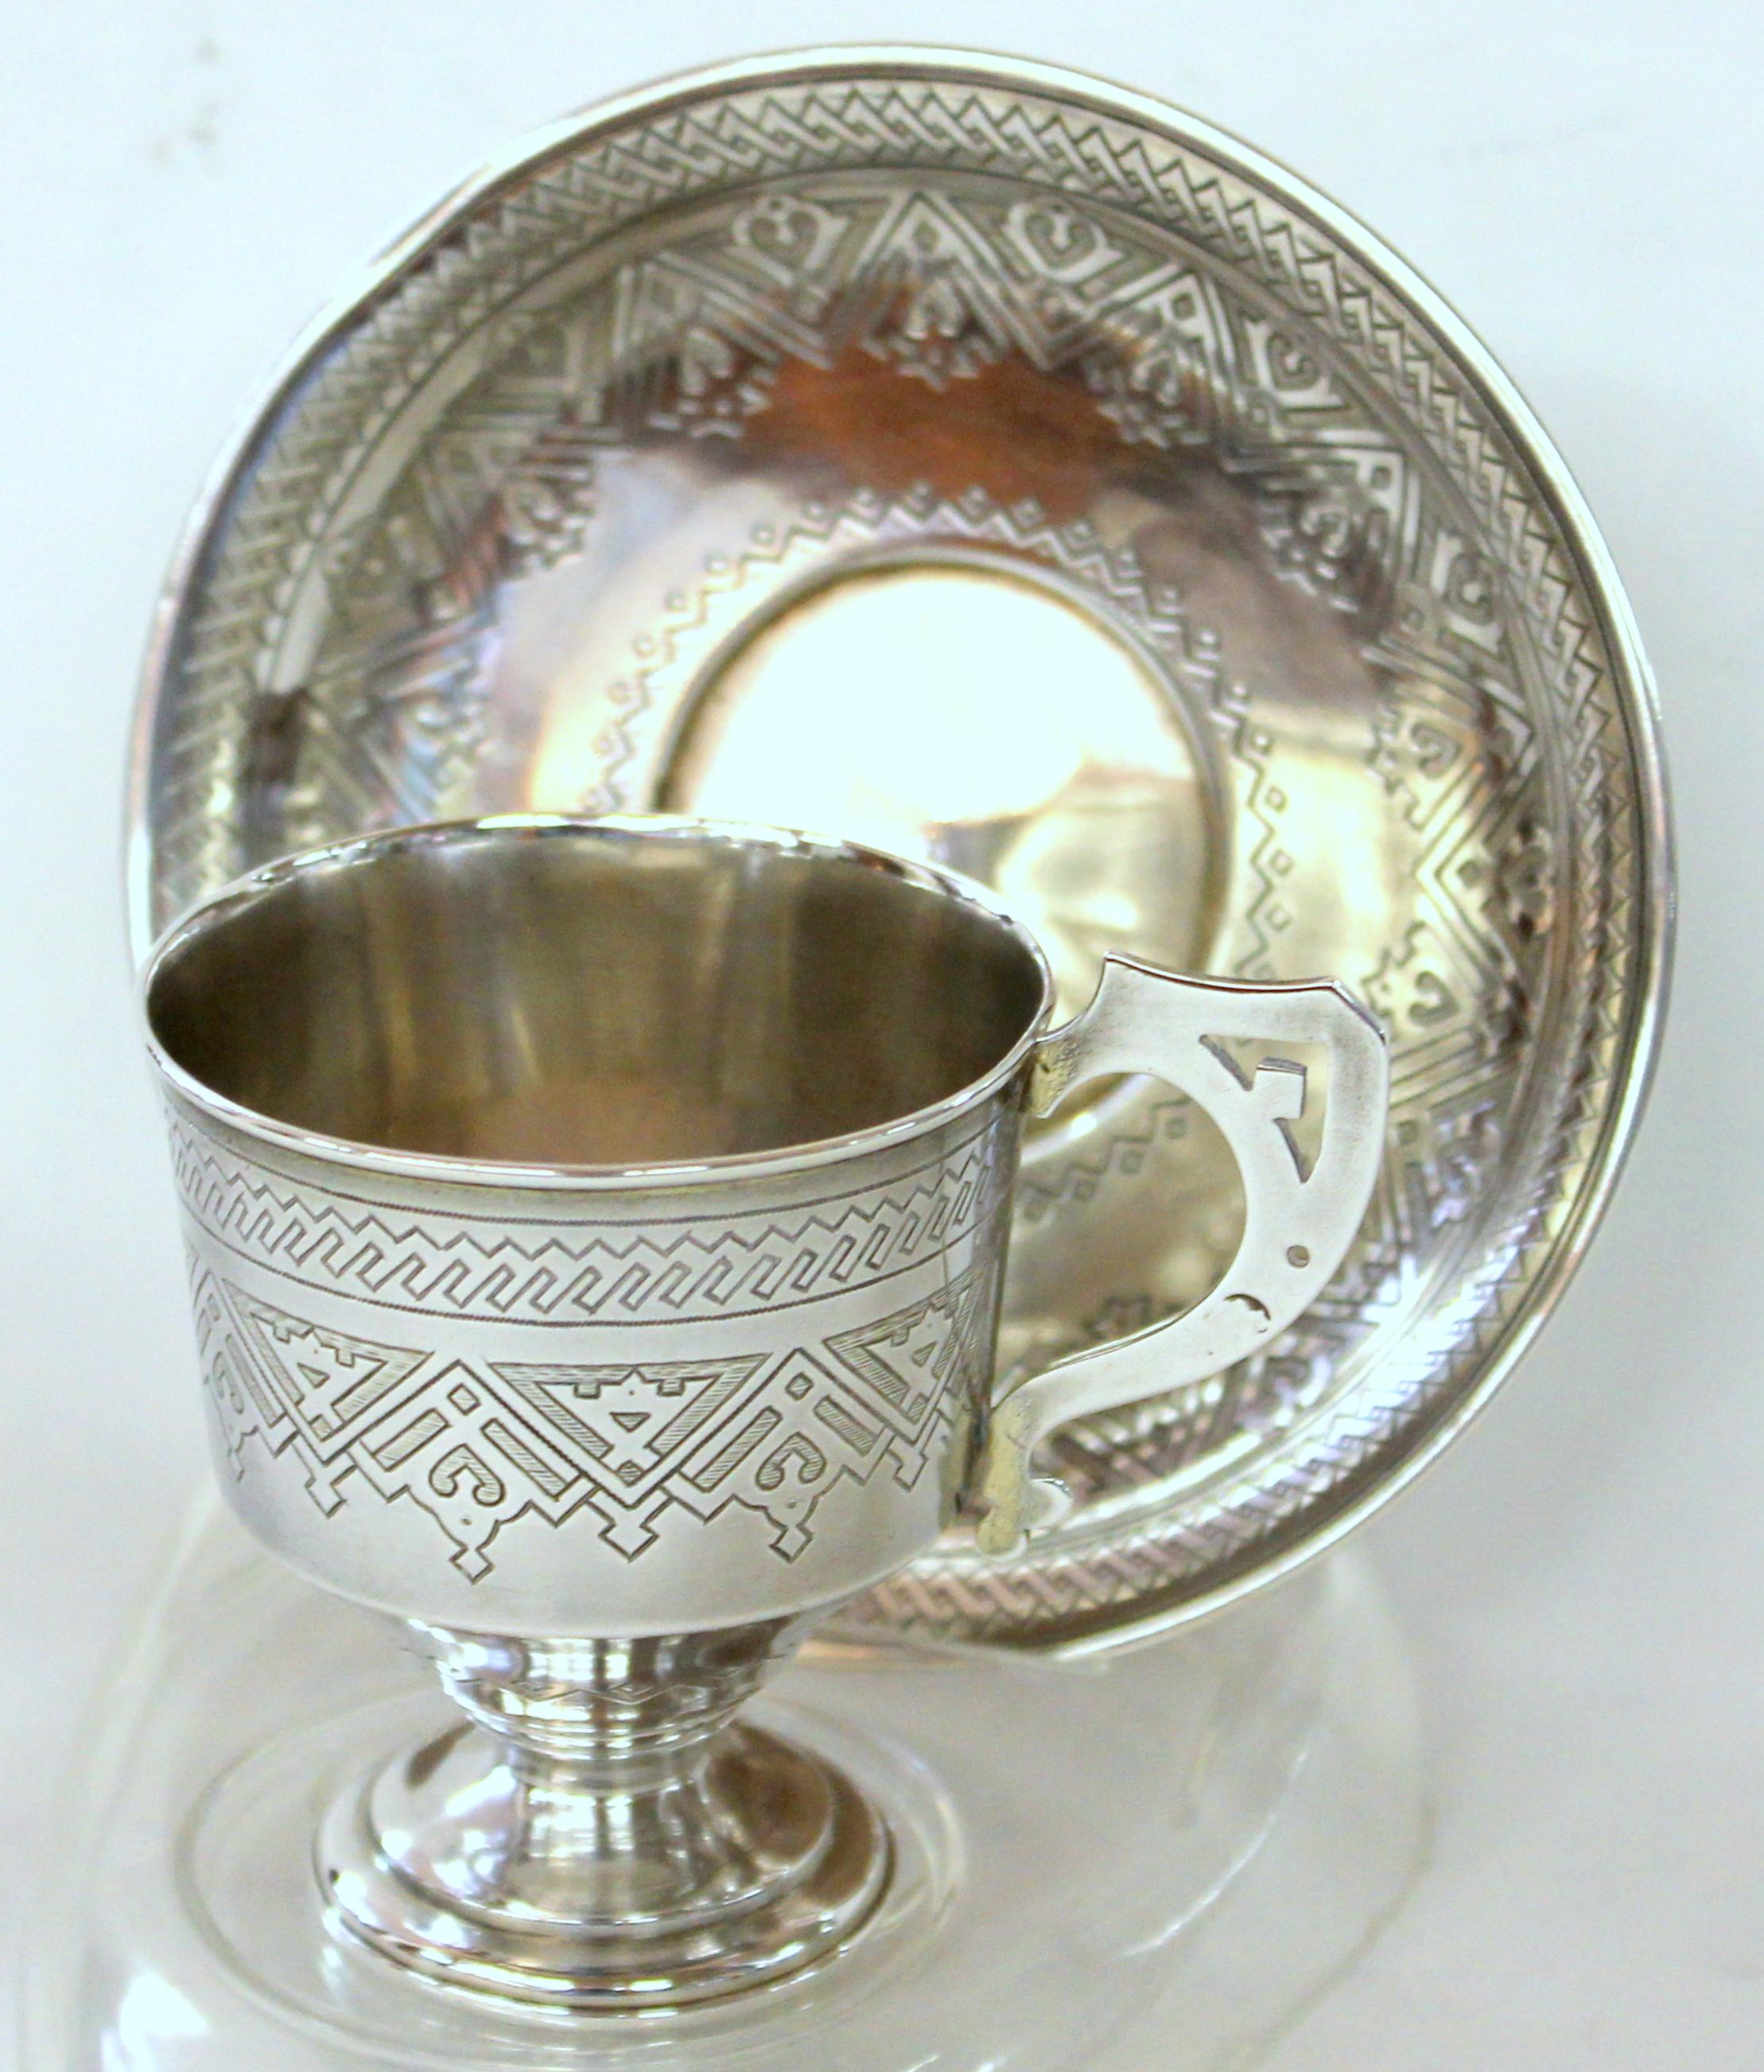 Rare and fine antique Imperial Russian .875 fine silver hand engraved cup and saucer.
Maker's marks for Aleksandr Fuld, Moscow, and Master Assayer's mark for Aleksandr Nikolayevich Krollau, Vilnius.

Cyrillic maker's mark and master assayer's